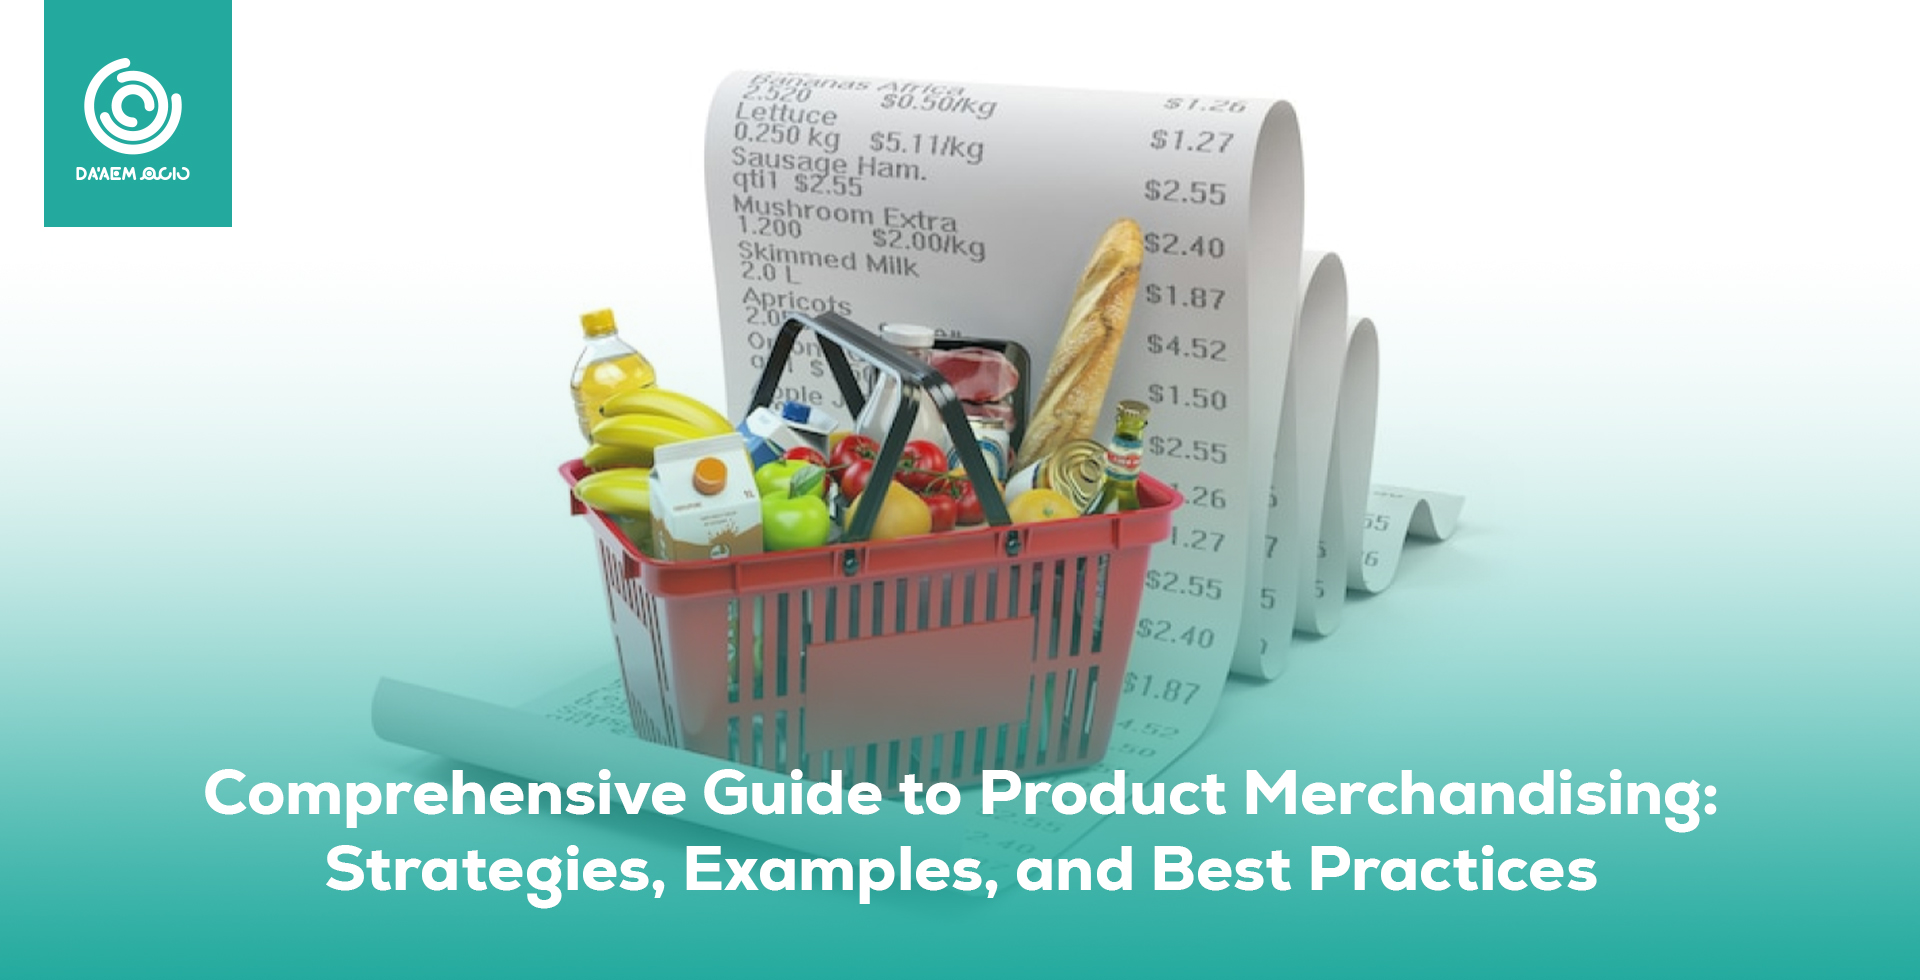 Comprehensive Guide to Product Merchandising: Strategies, Examples, and Best Practices